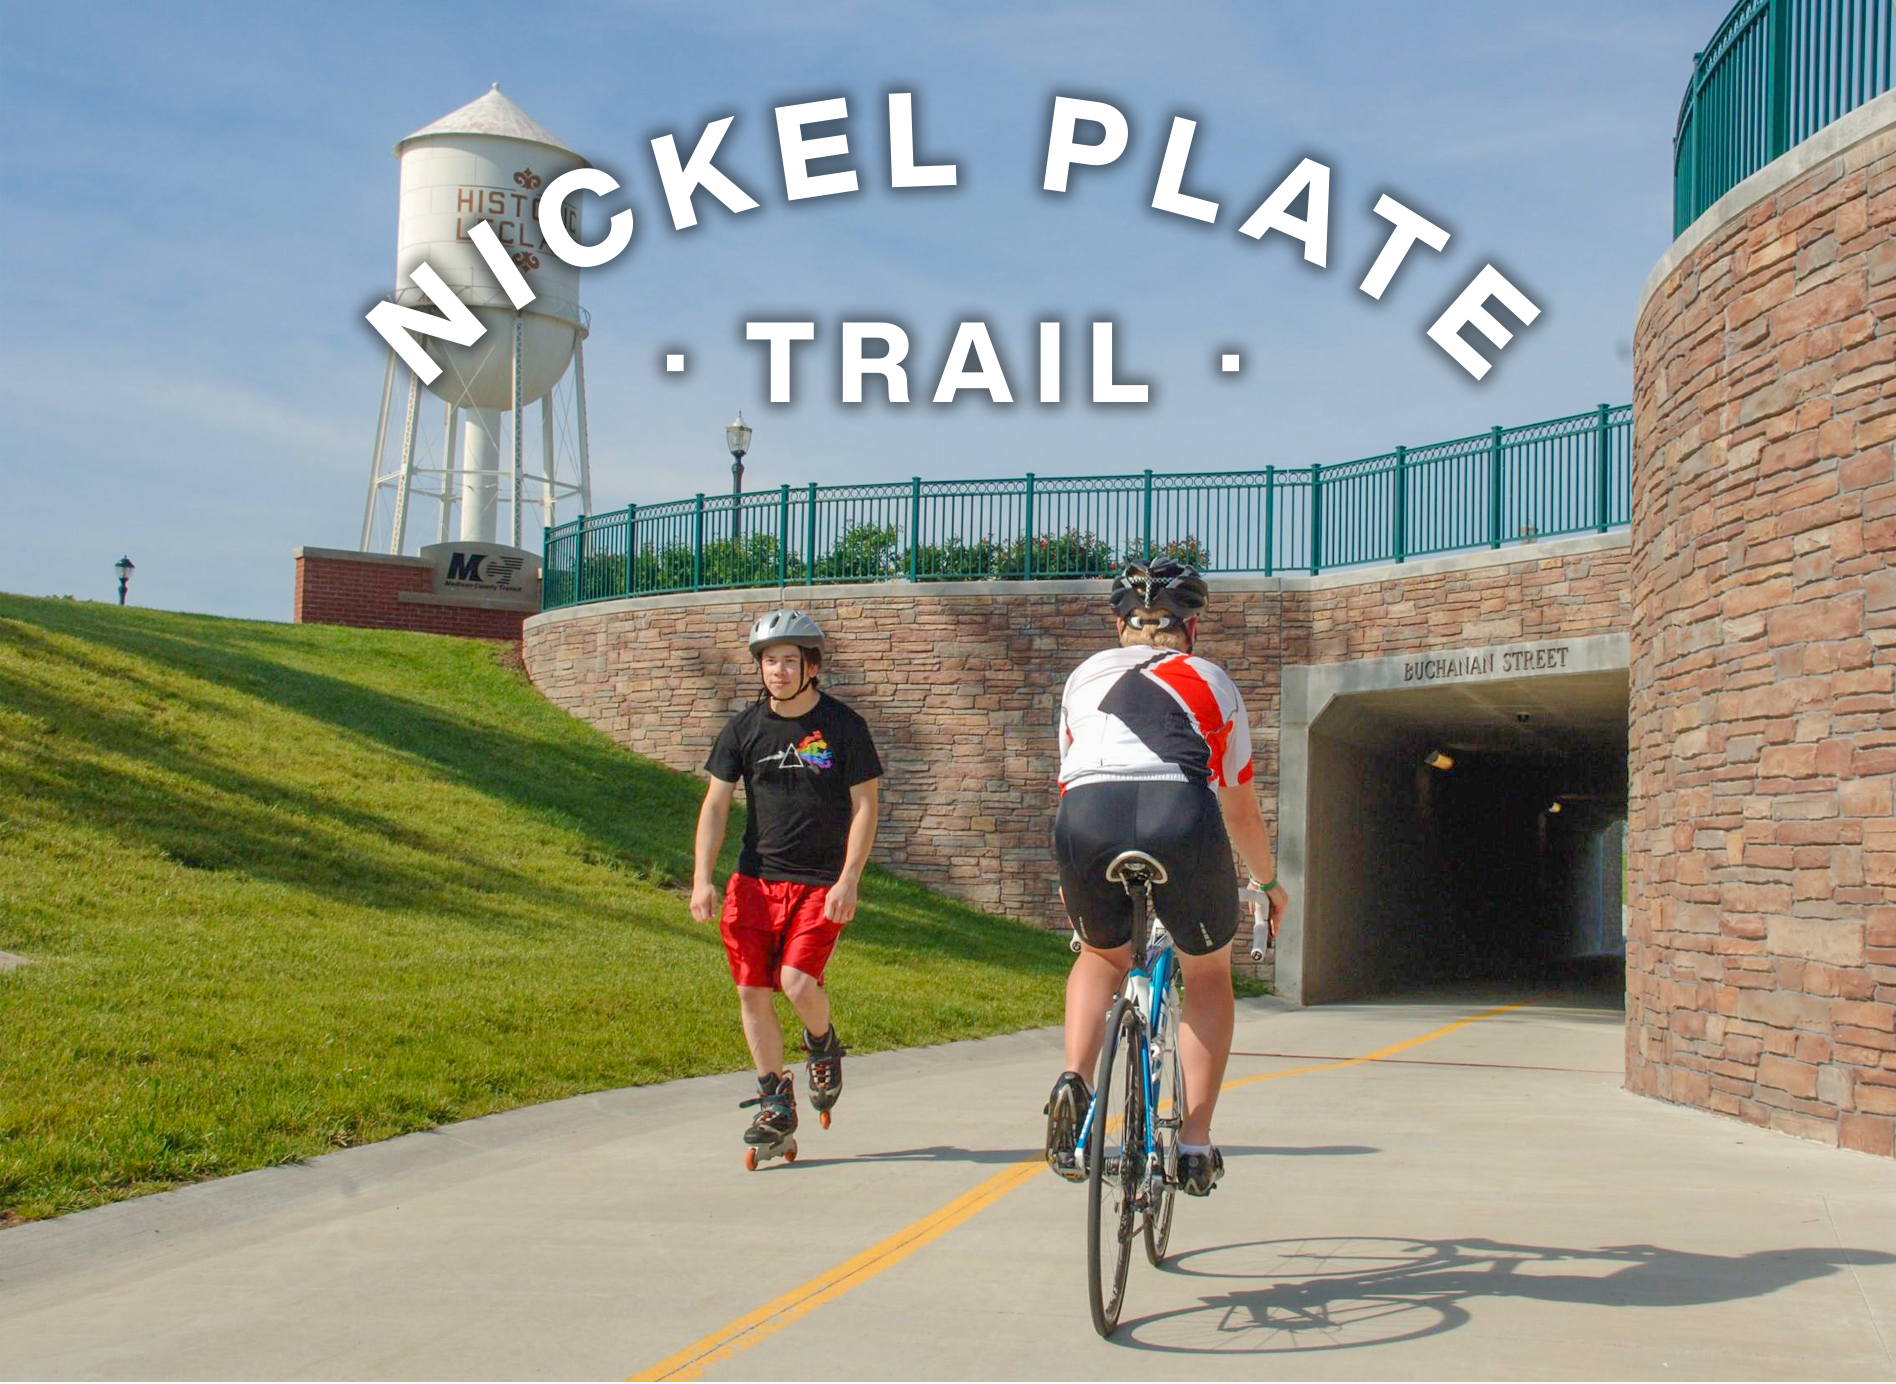 MCT Nickel Plate Trail